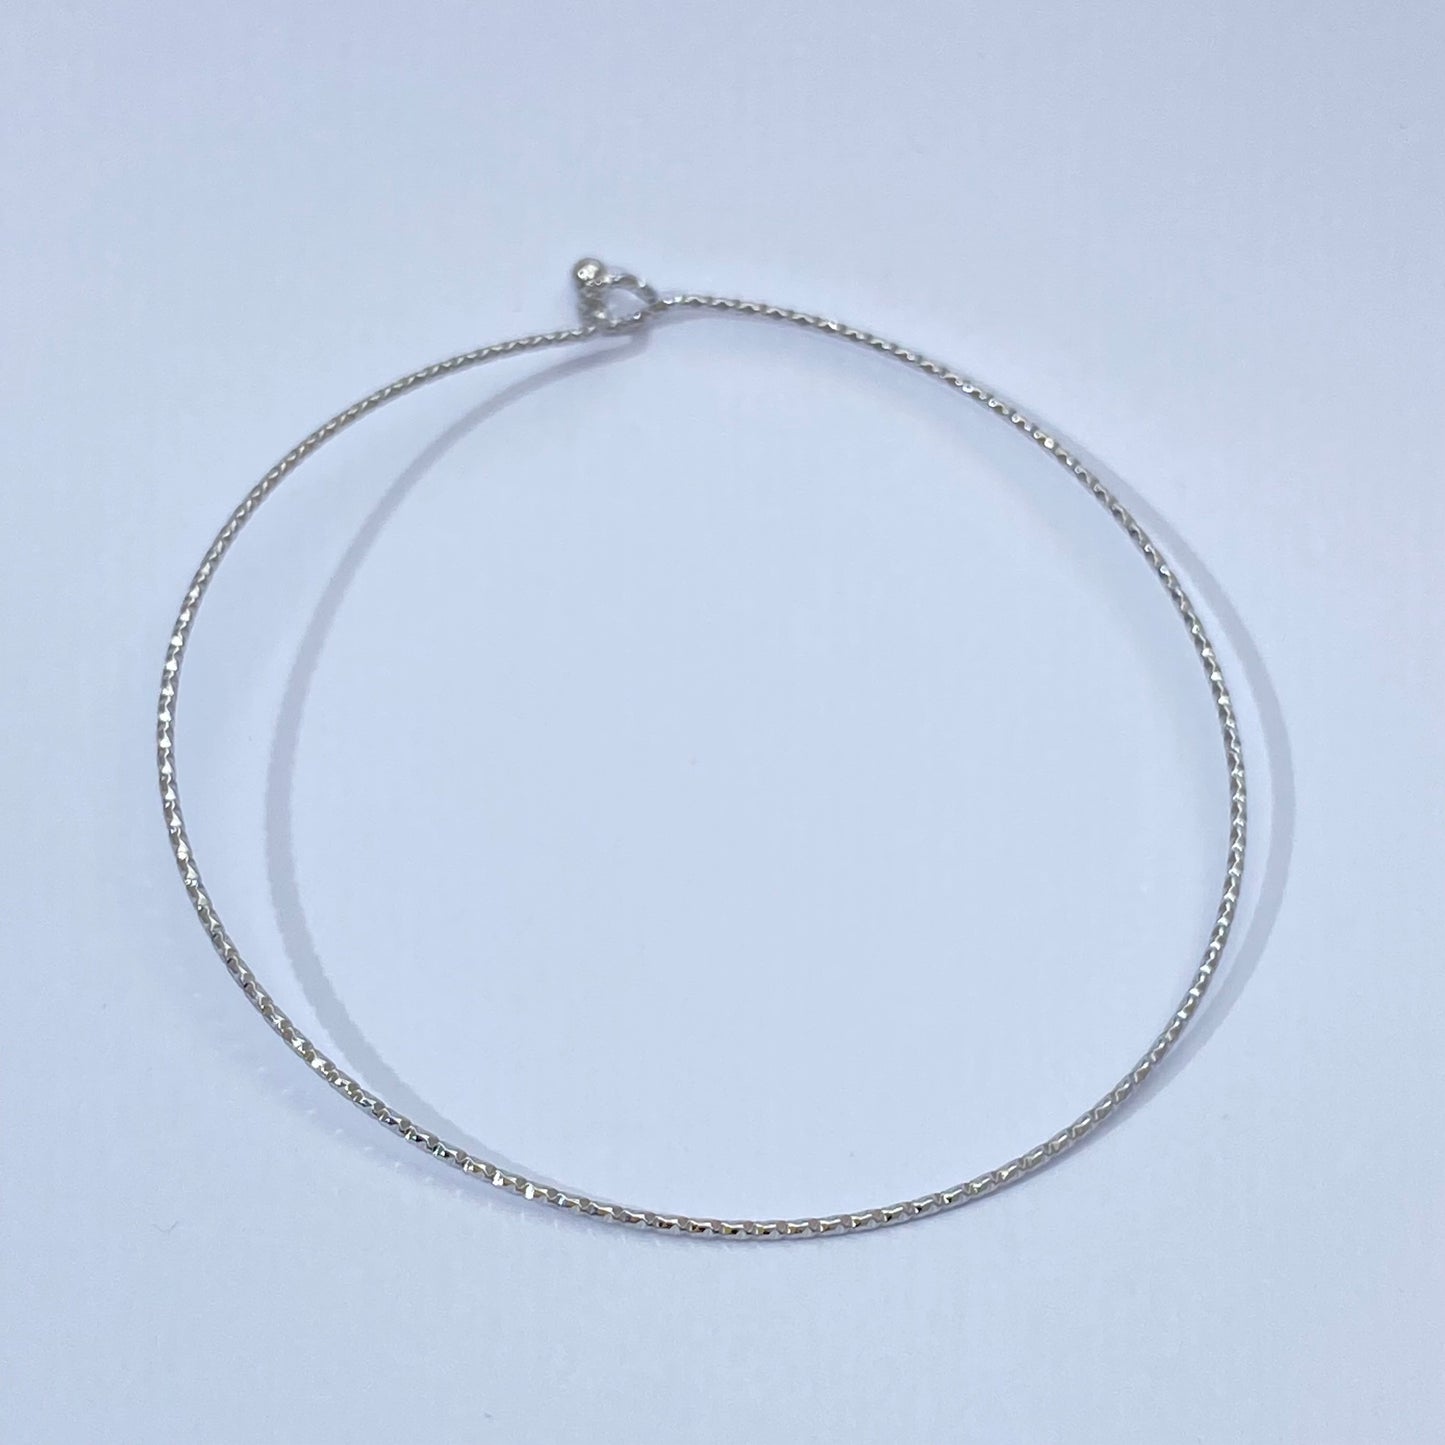 Embossing thin bangle in stainless steel